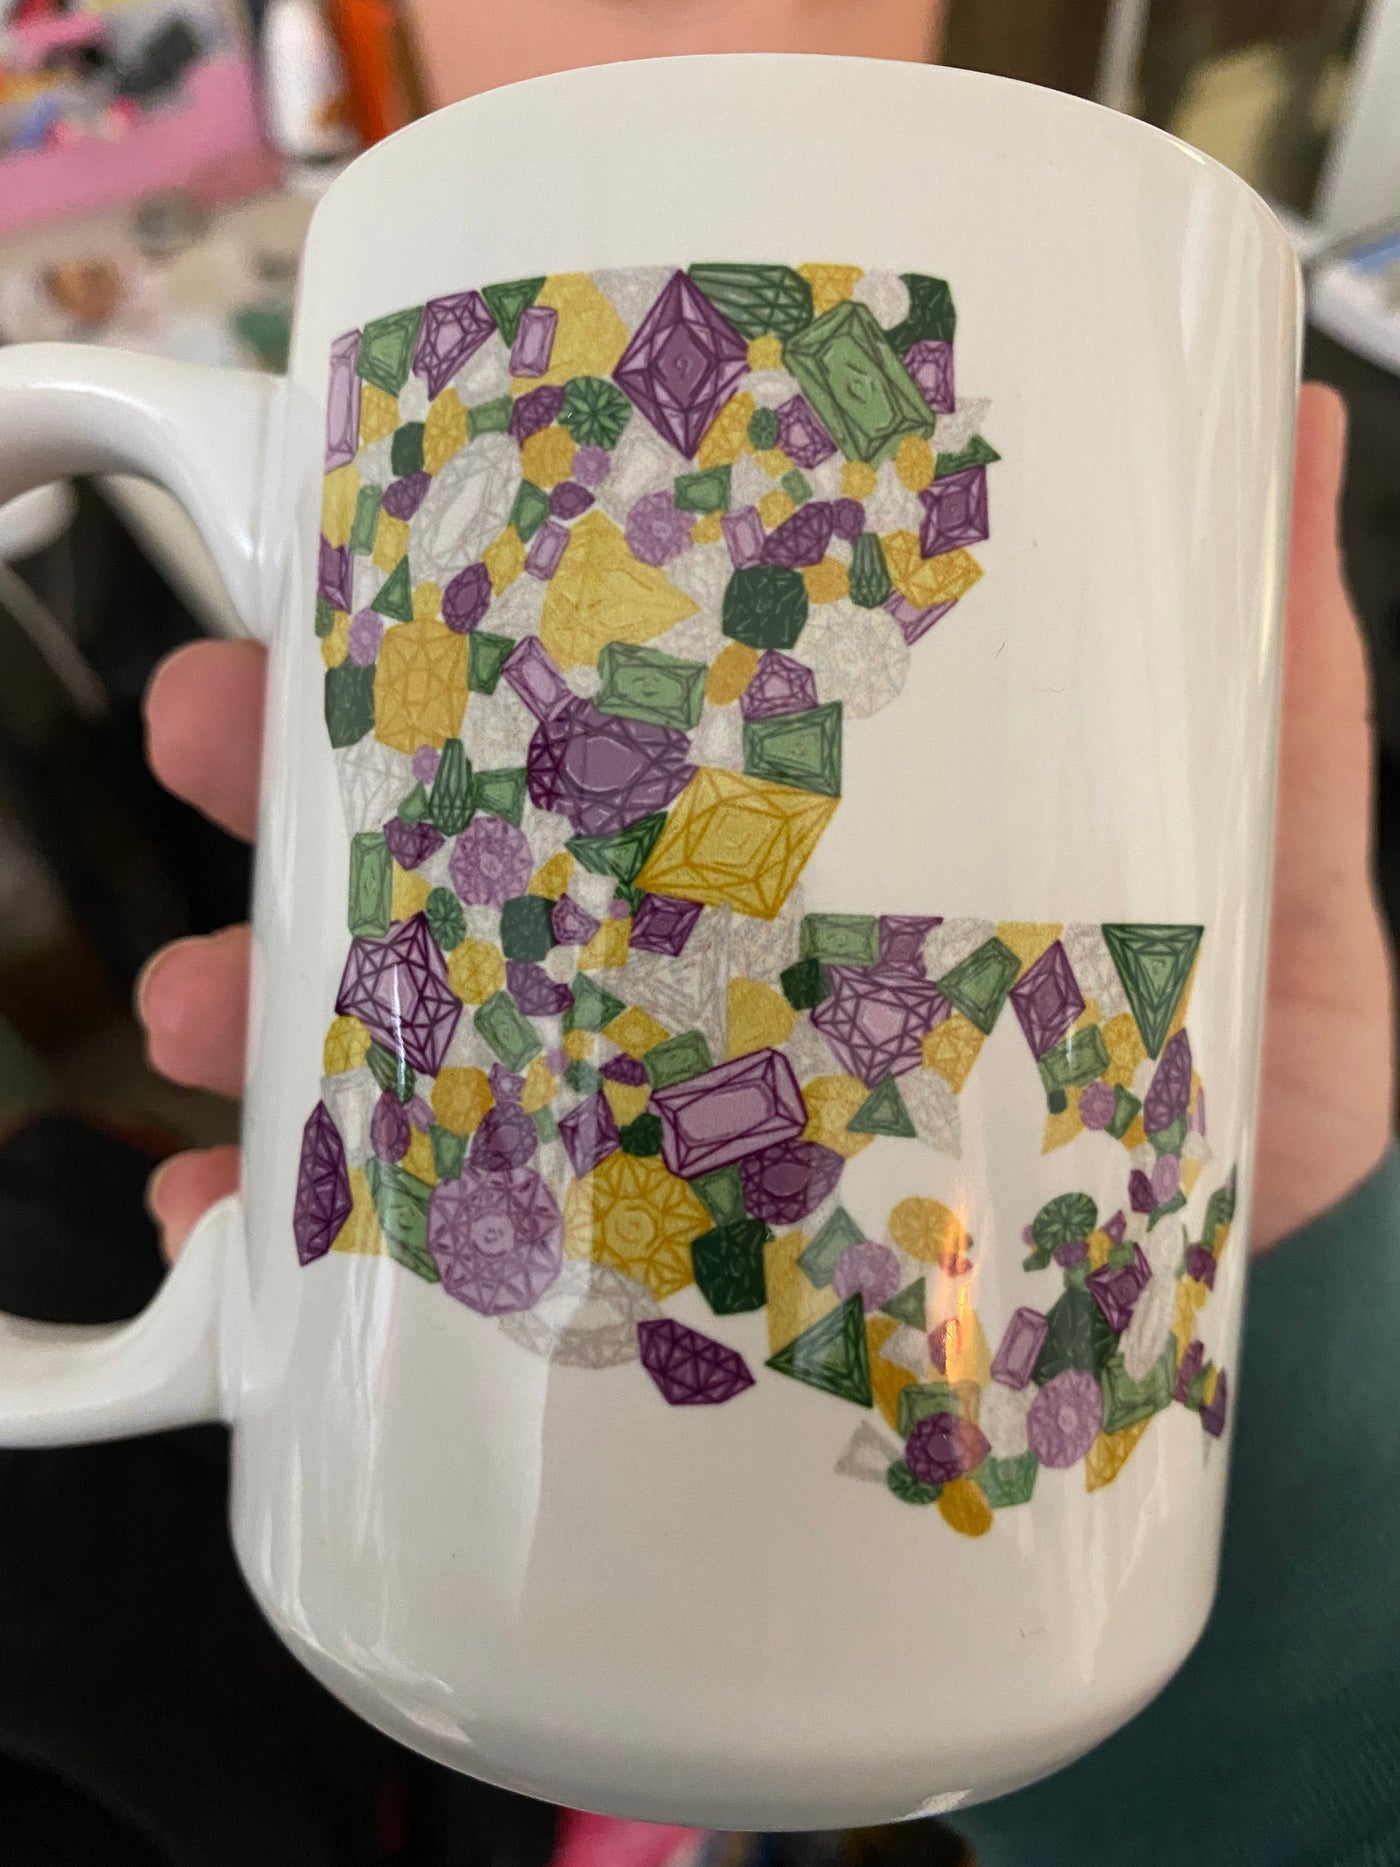 White coffee mug  with a graphic of the state of Louisiana compromised of different shapes and sizes of purple, green, yellow and clear jewels.